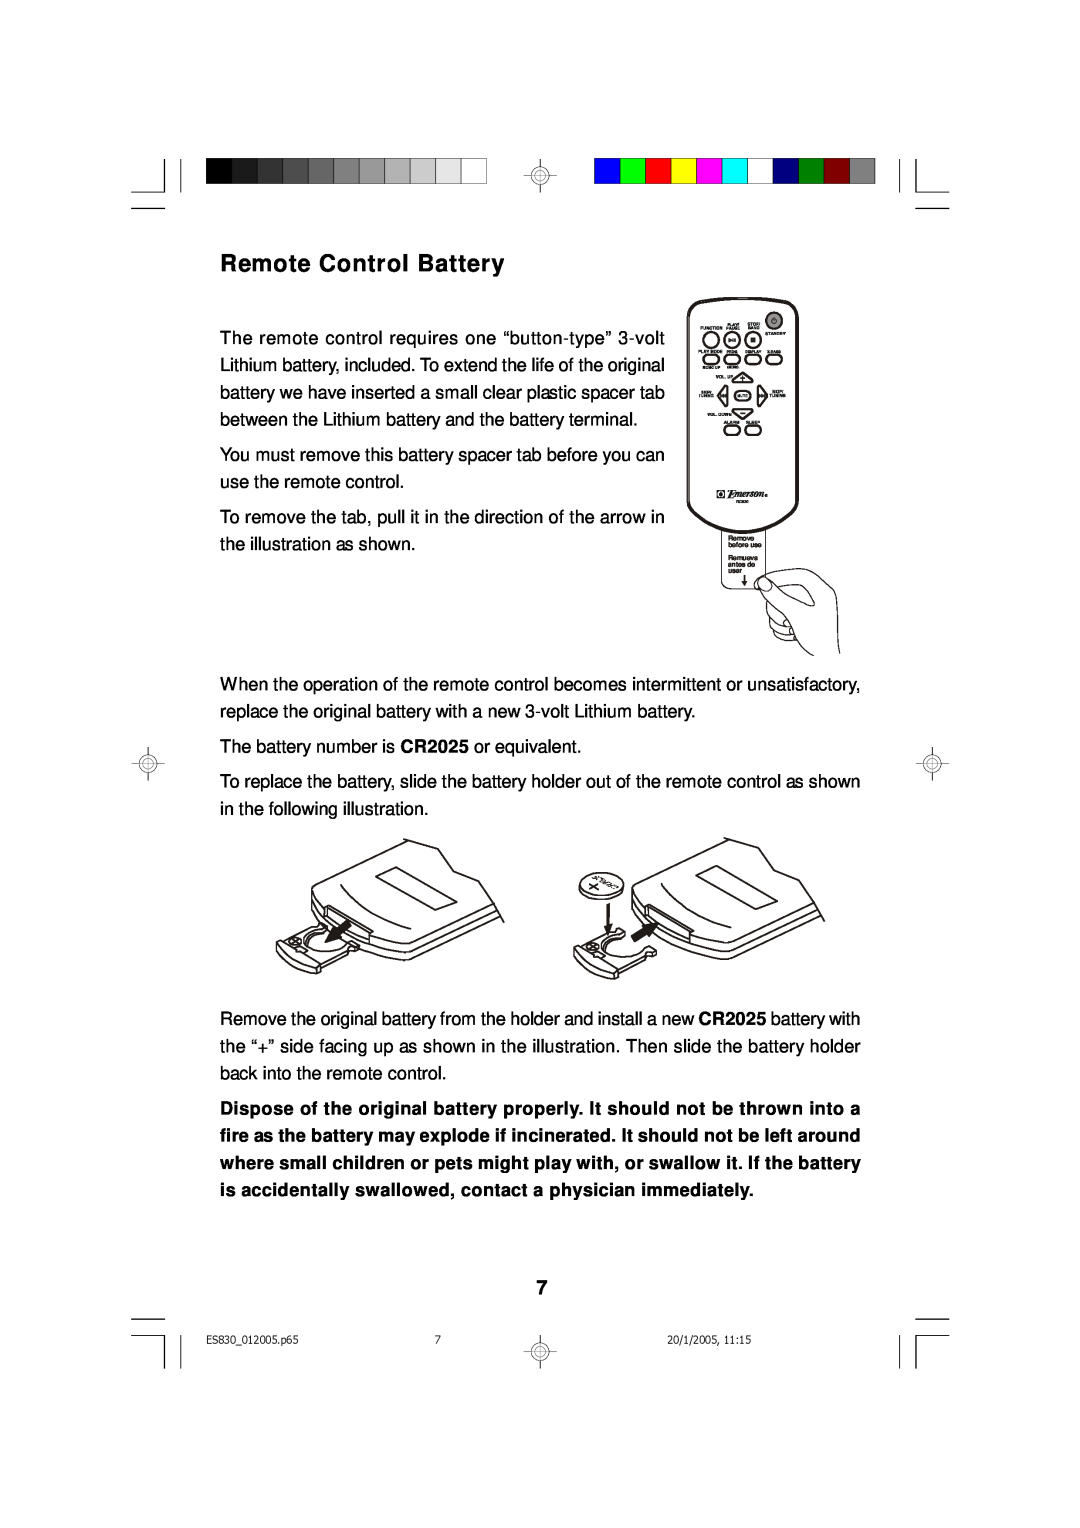 Emerson ES830 owner manual Remote Control Battery, the illustration as shown 